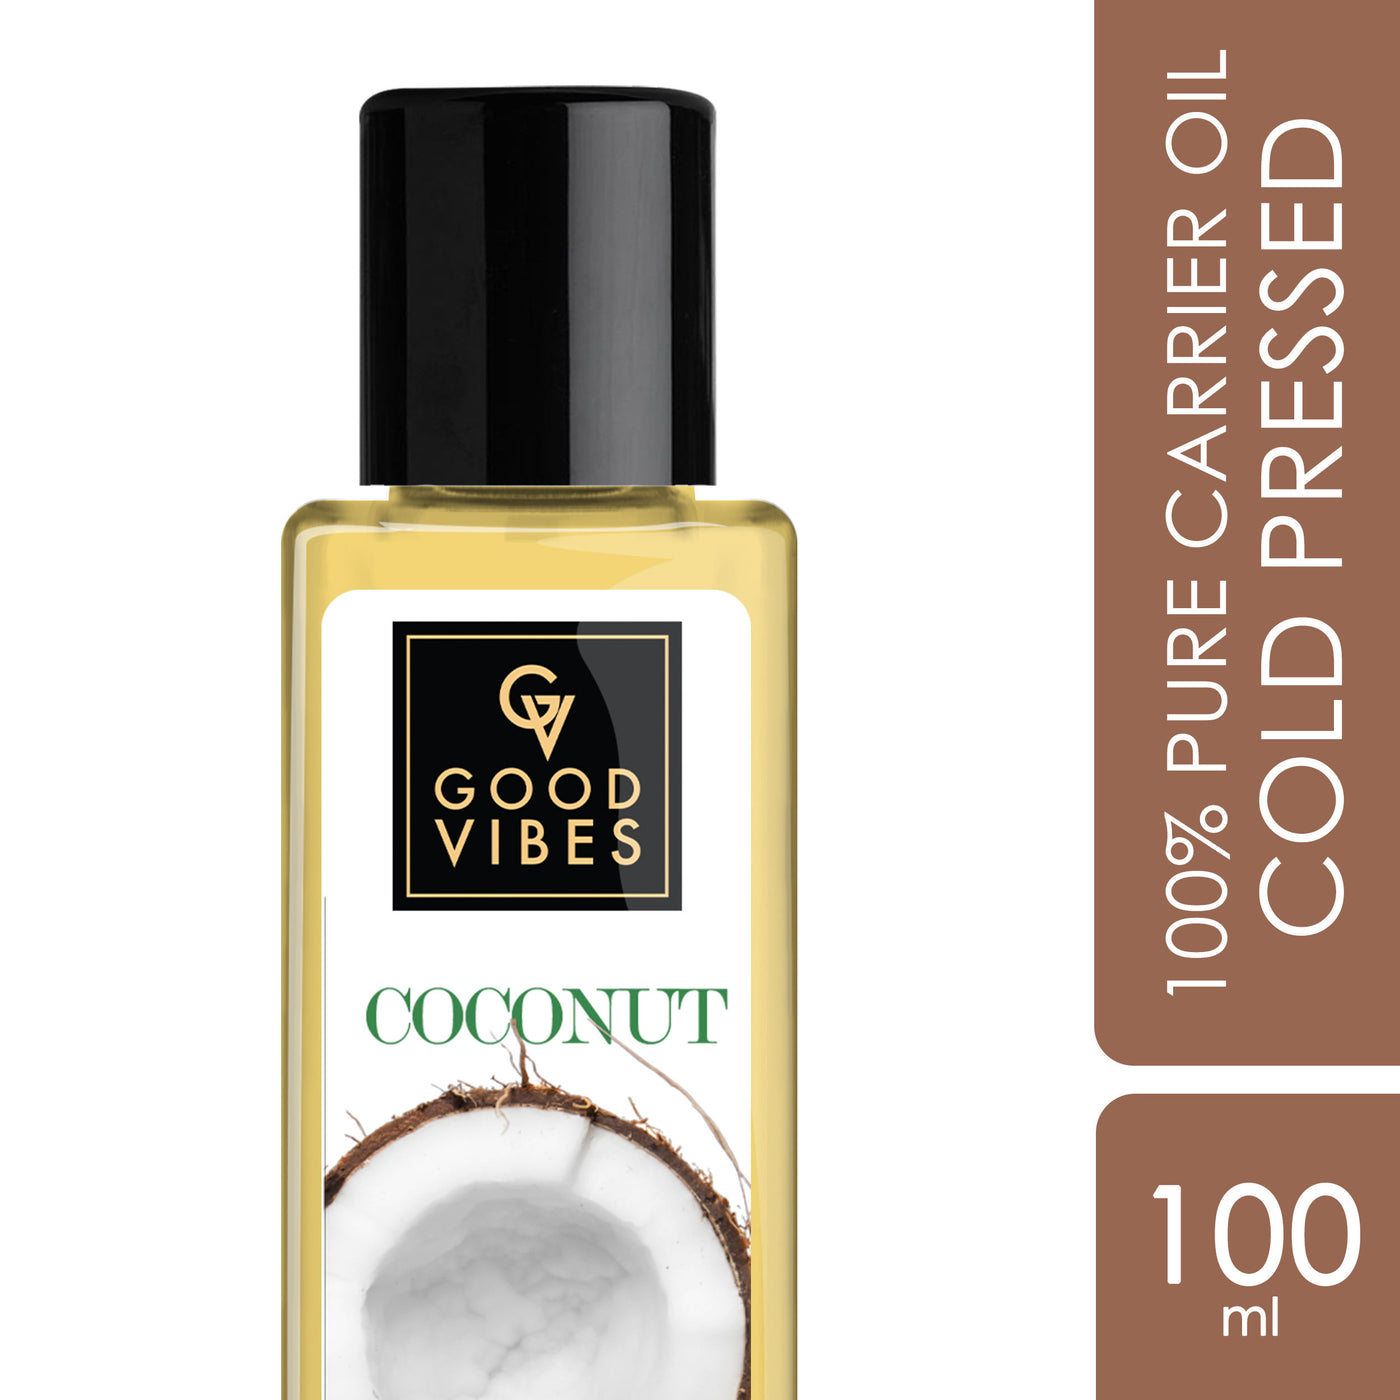 good-vibes-coconut-100-percentage-pure-cold-pressed-carrier-oil-for-hair-and-skin-hair-growth-anti-ageing-no-parabens-no-animal-testing-100-ml-1-1